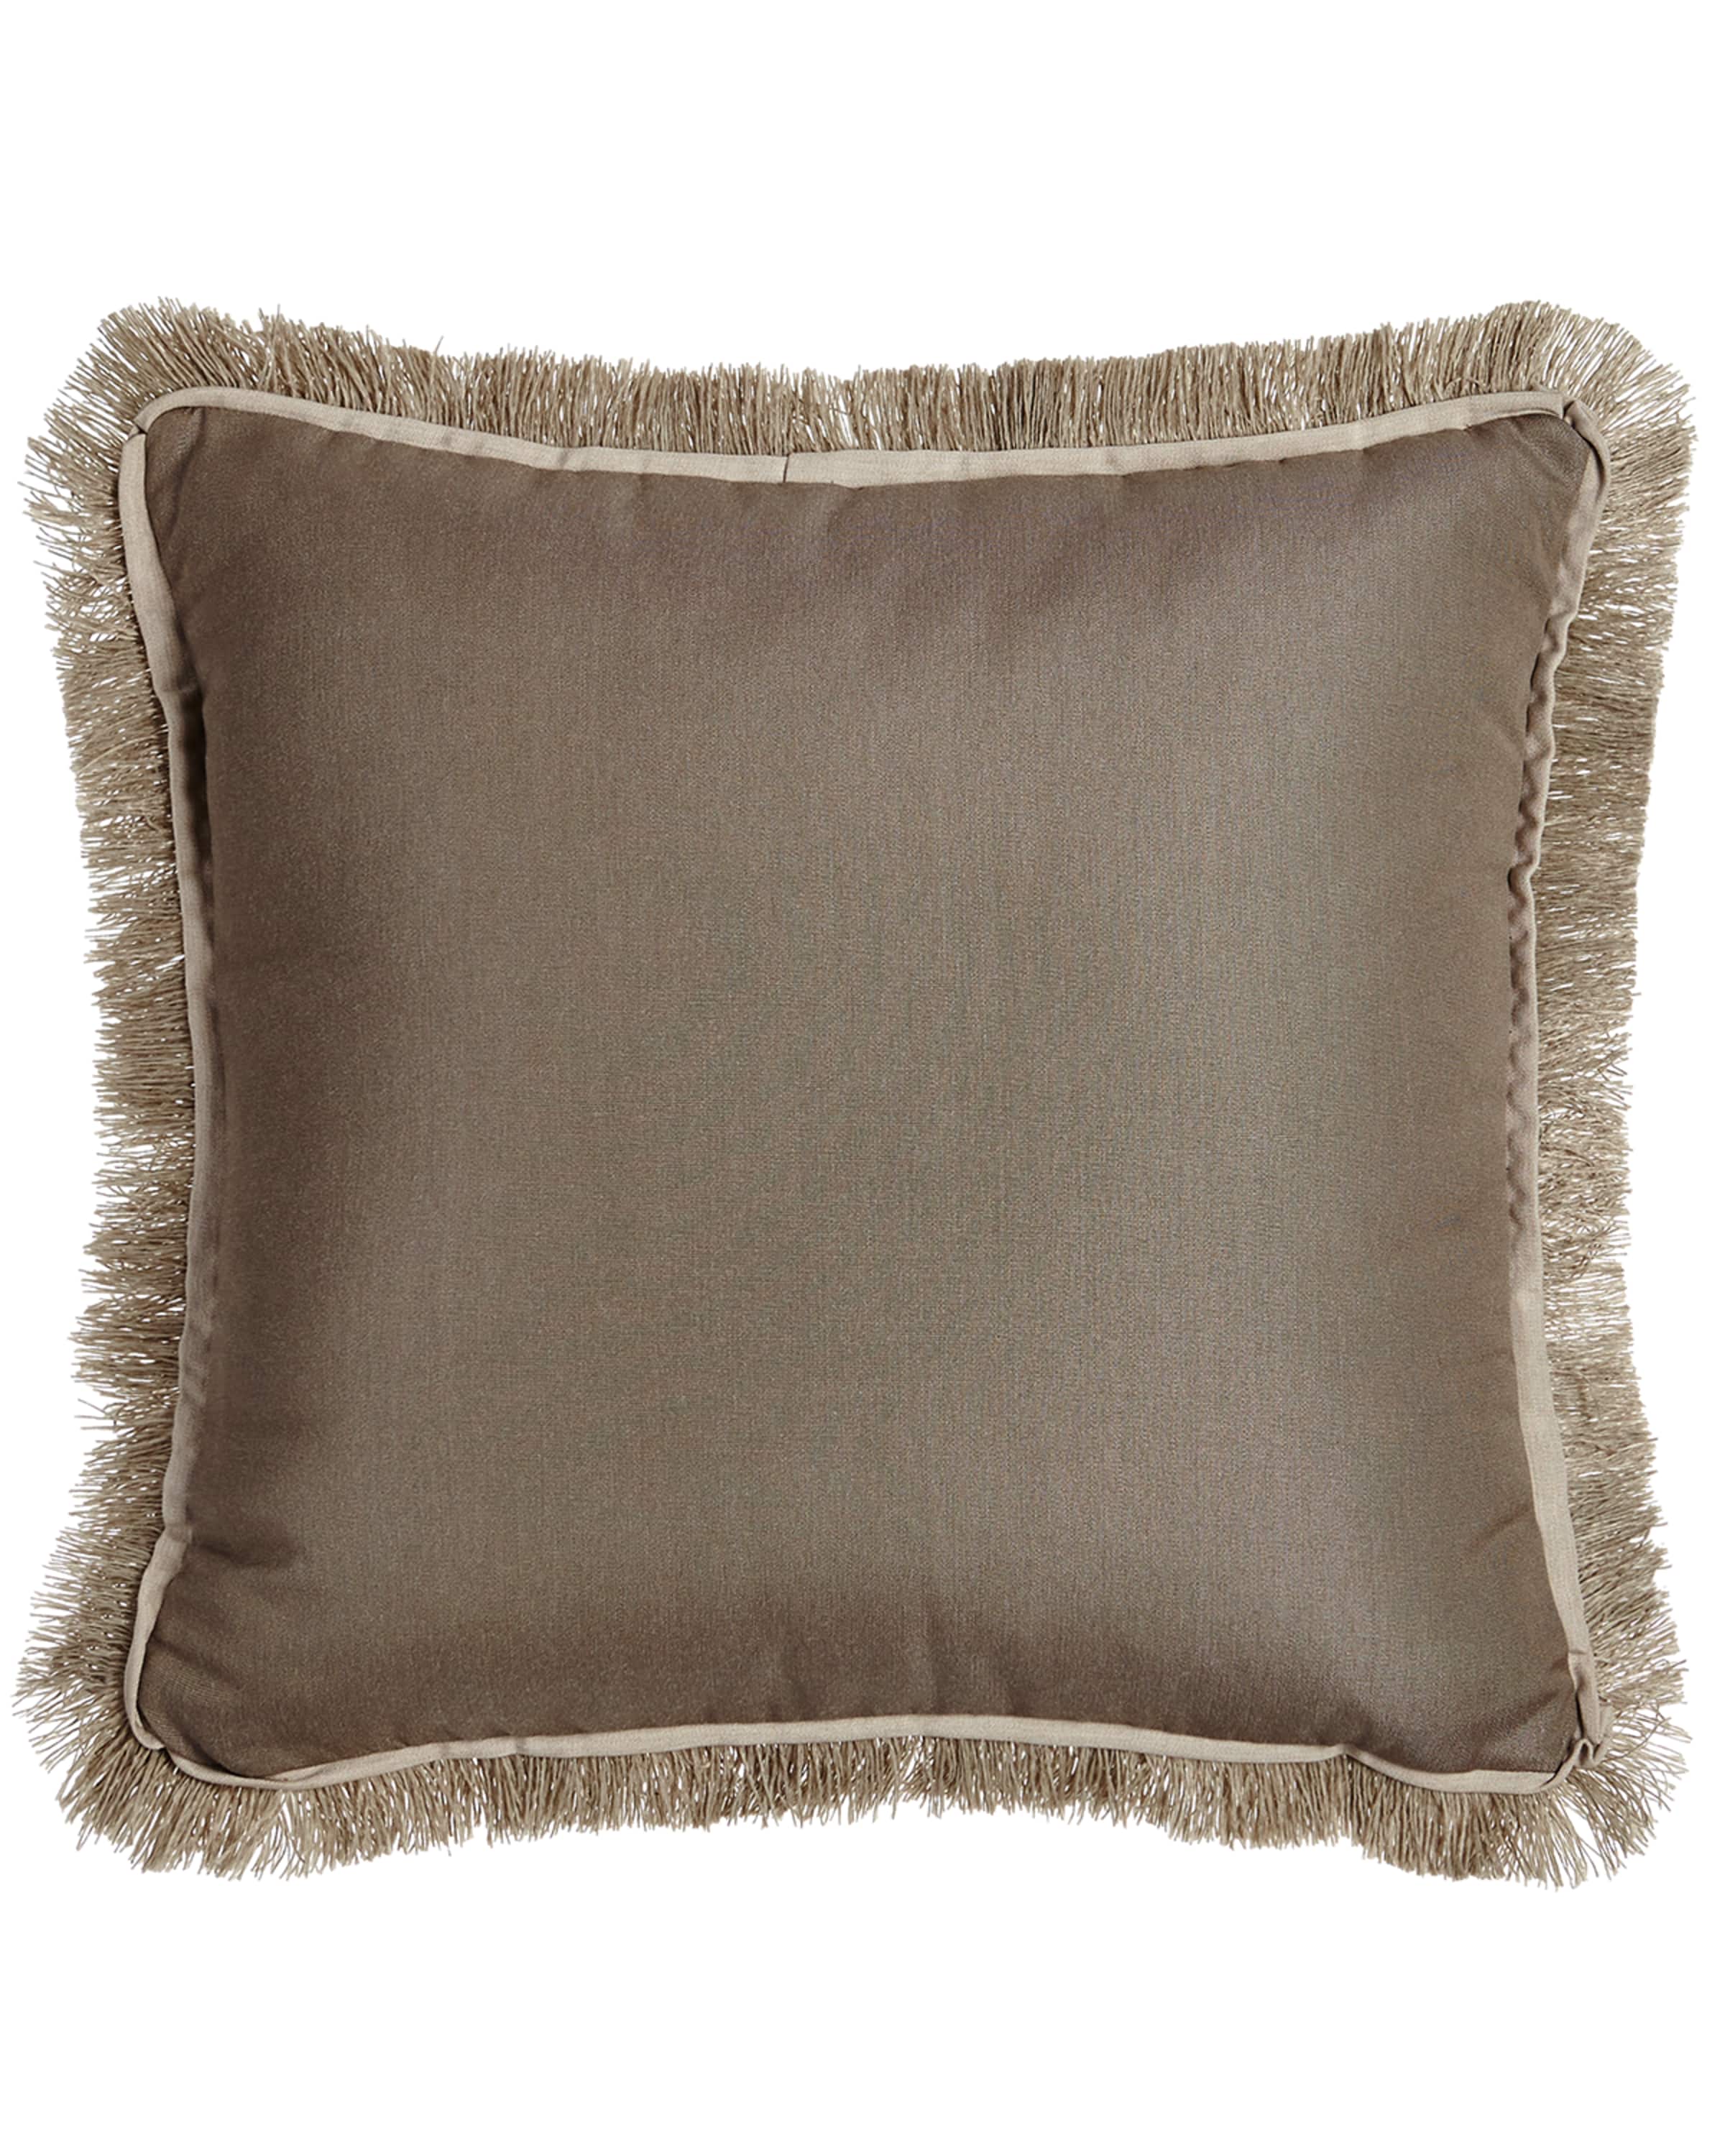 Lacefield Designs Fringed Taupe Outdoor Pillow